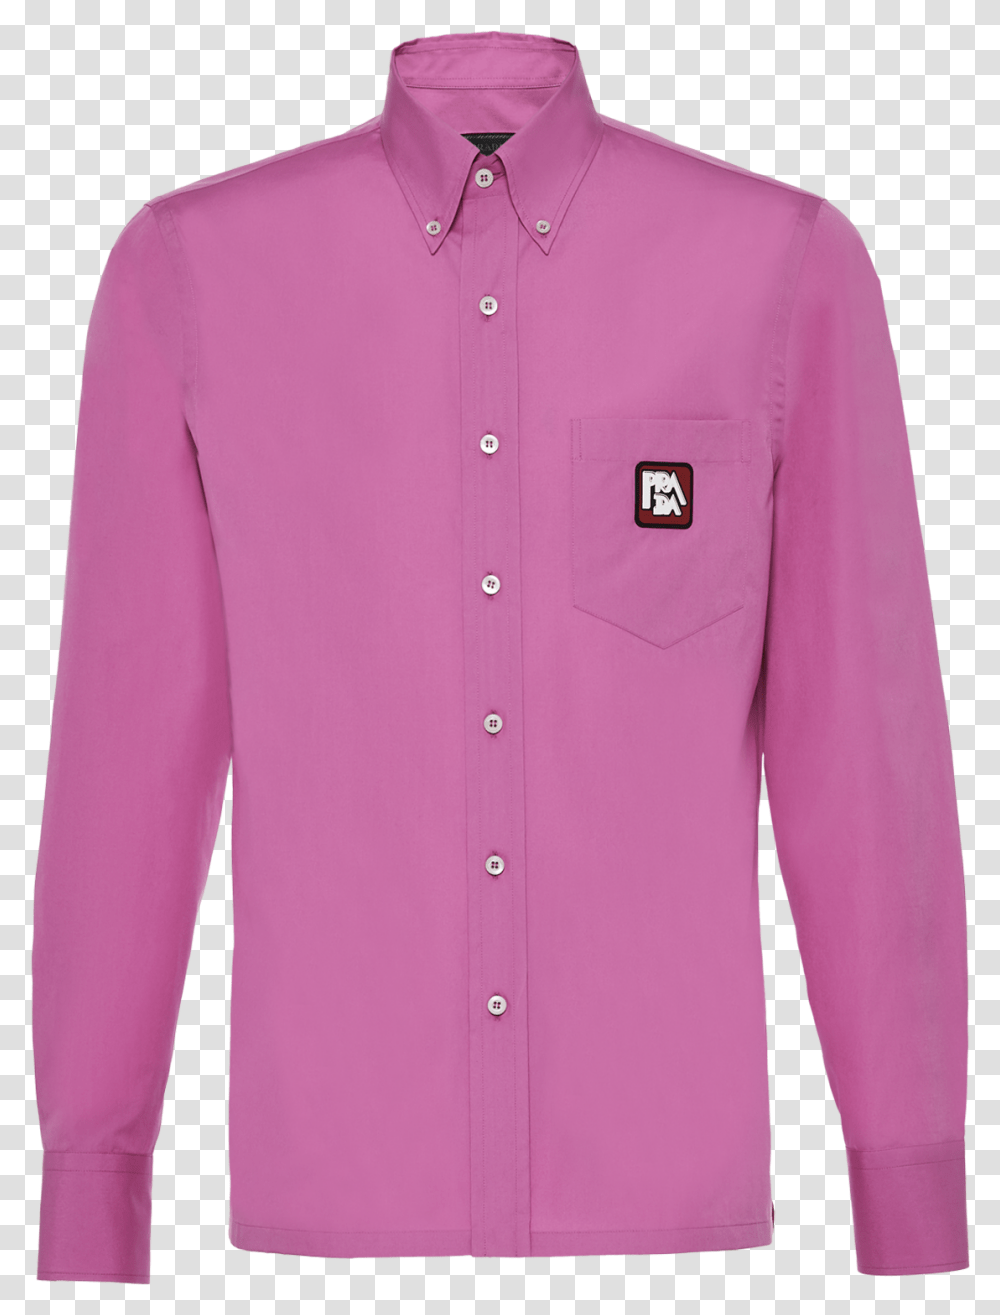 Download Pink Banner Image With Long Sleeve, Clothing, Apparel, Shirt, Dress Shirt Transparent Png